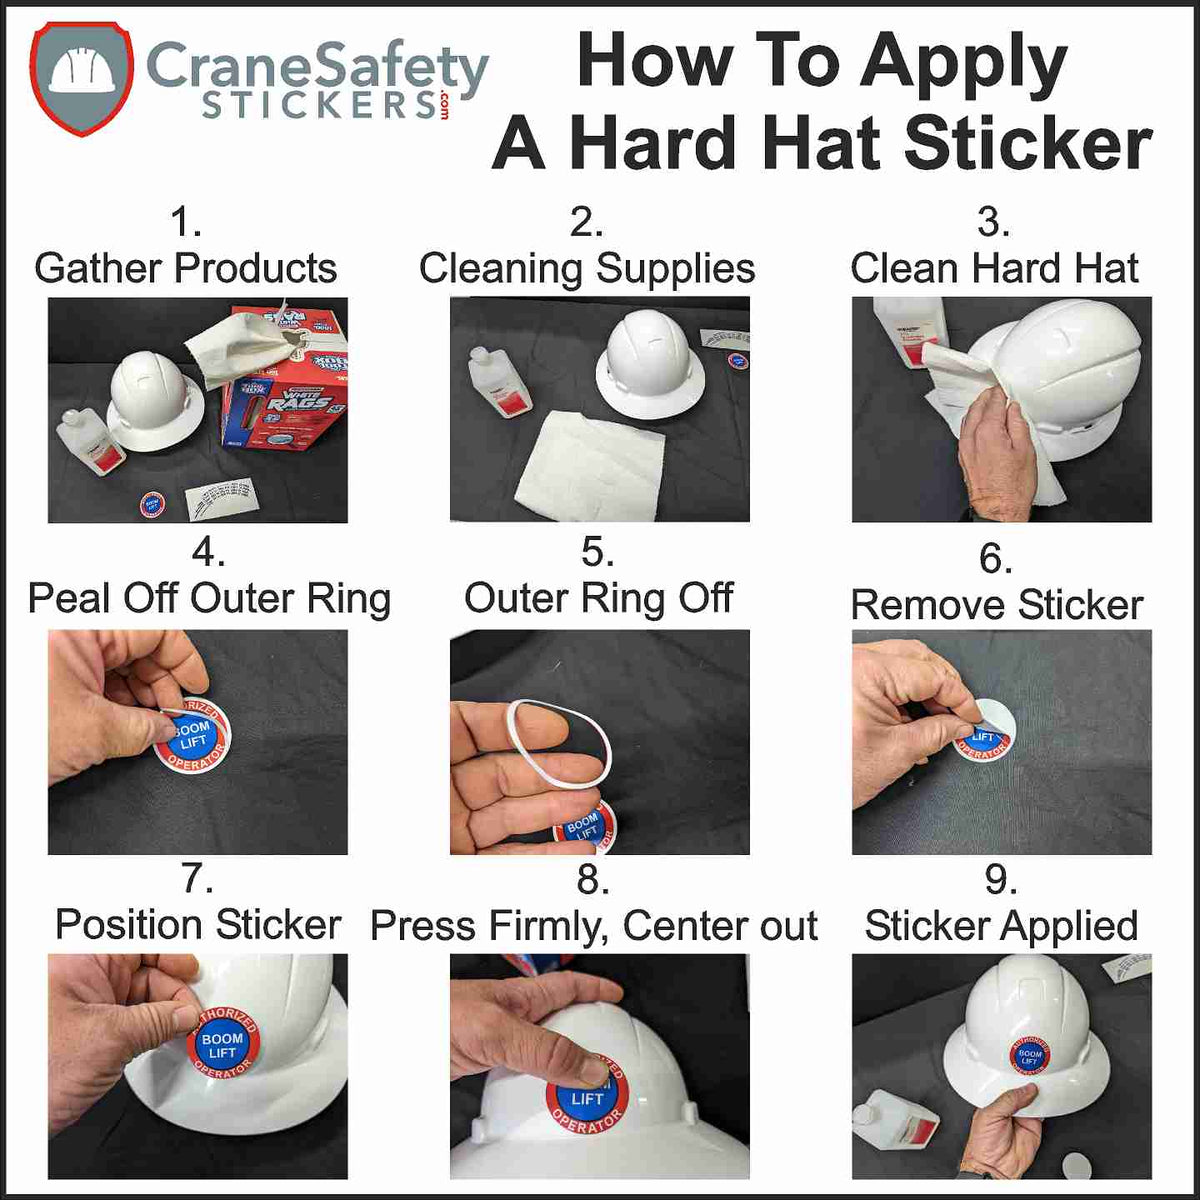 Directions on how to apply our one year injury free sticker to a hard hat.